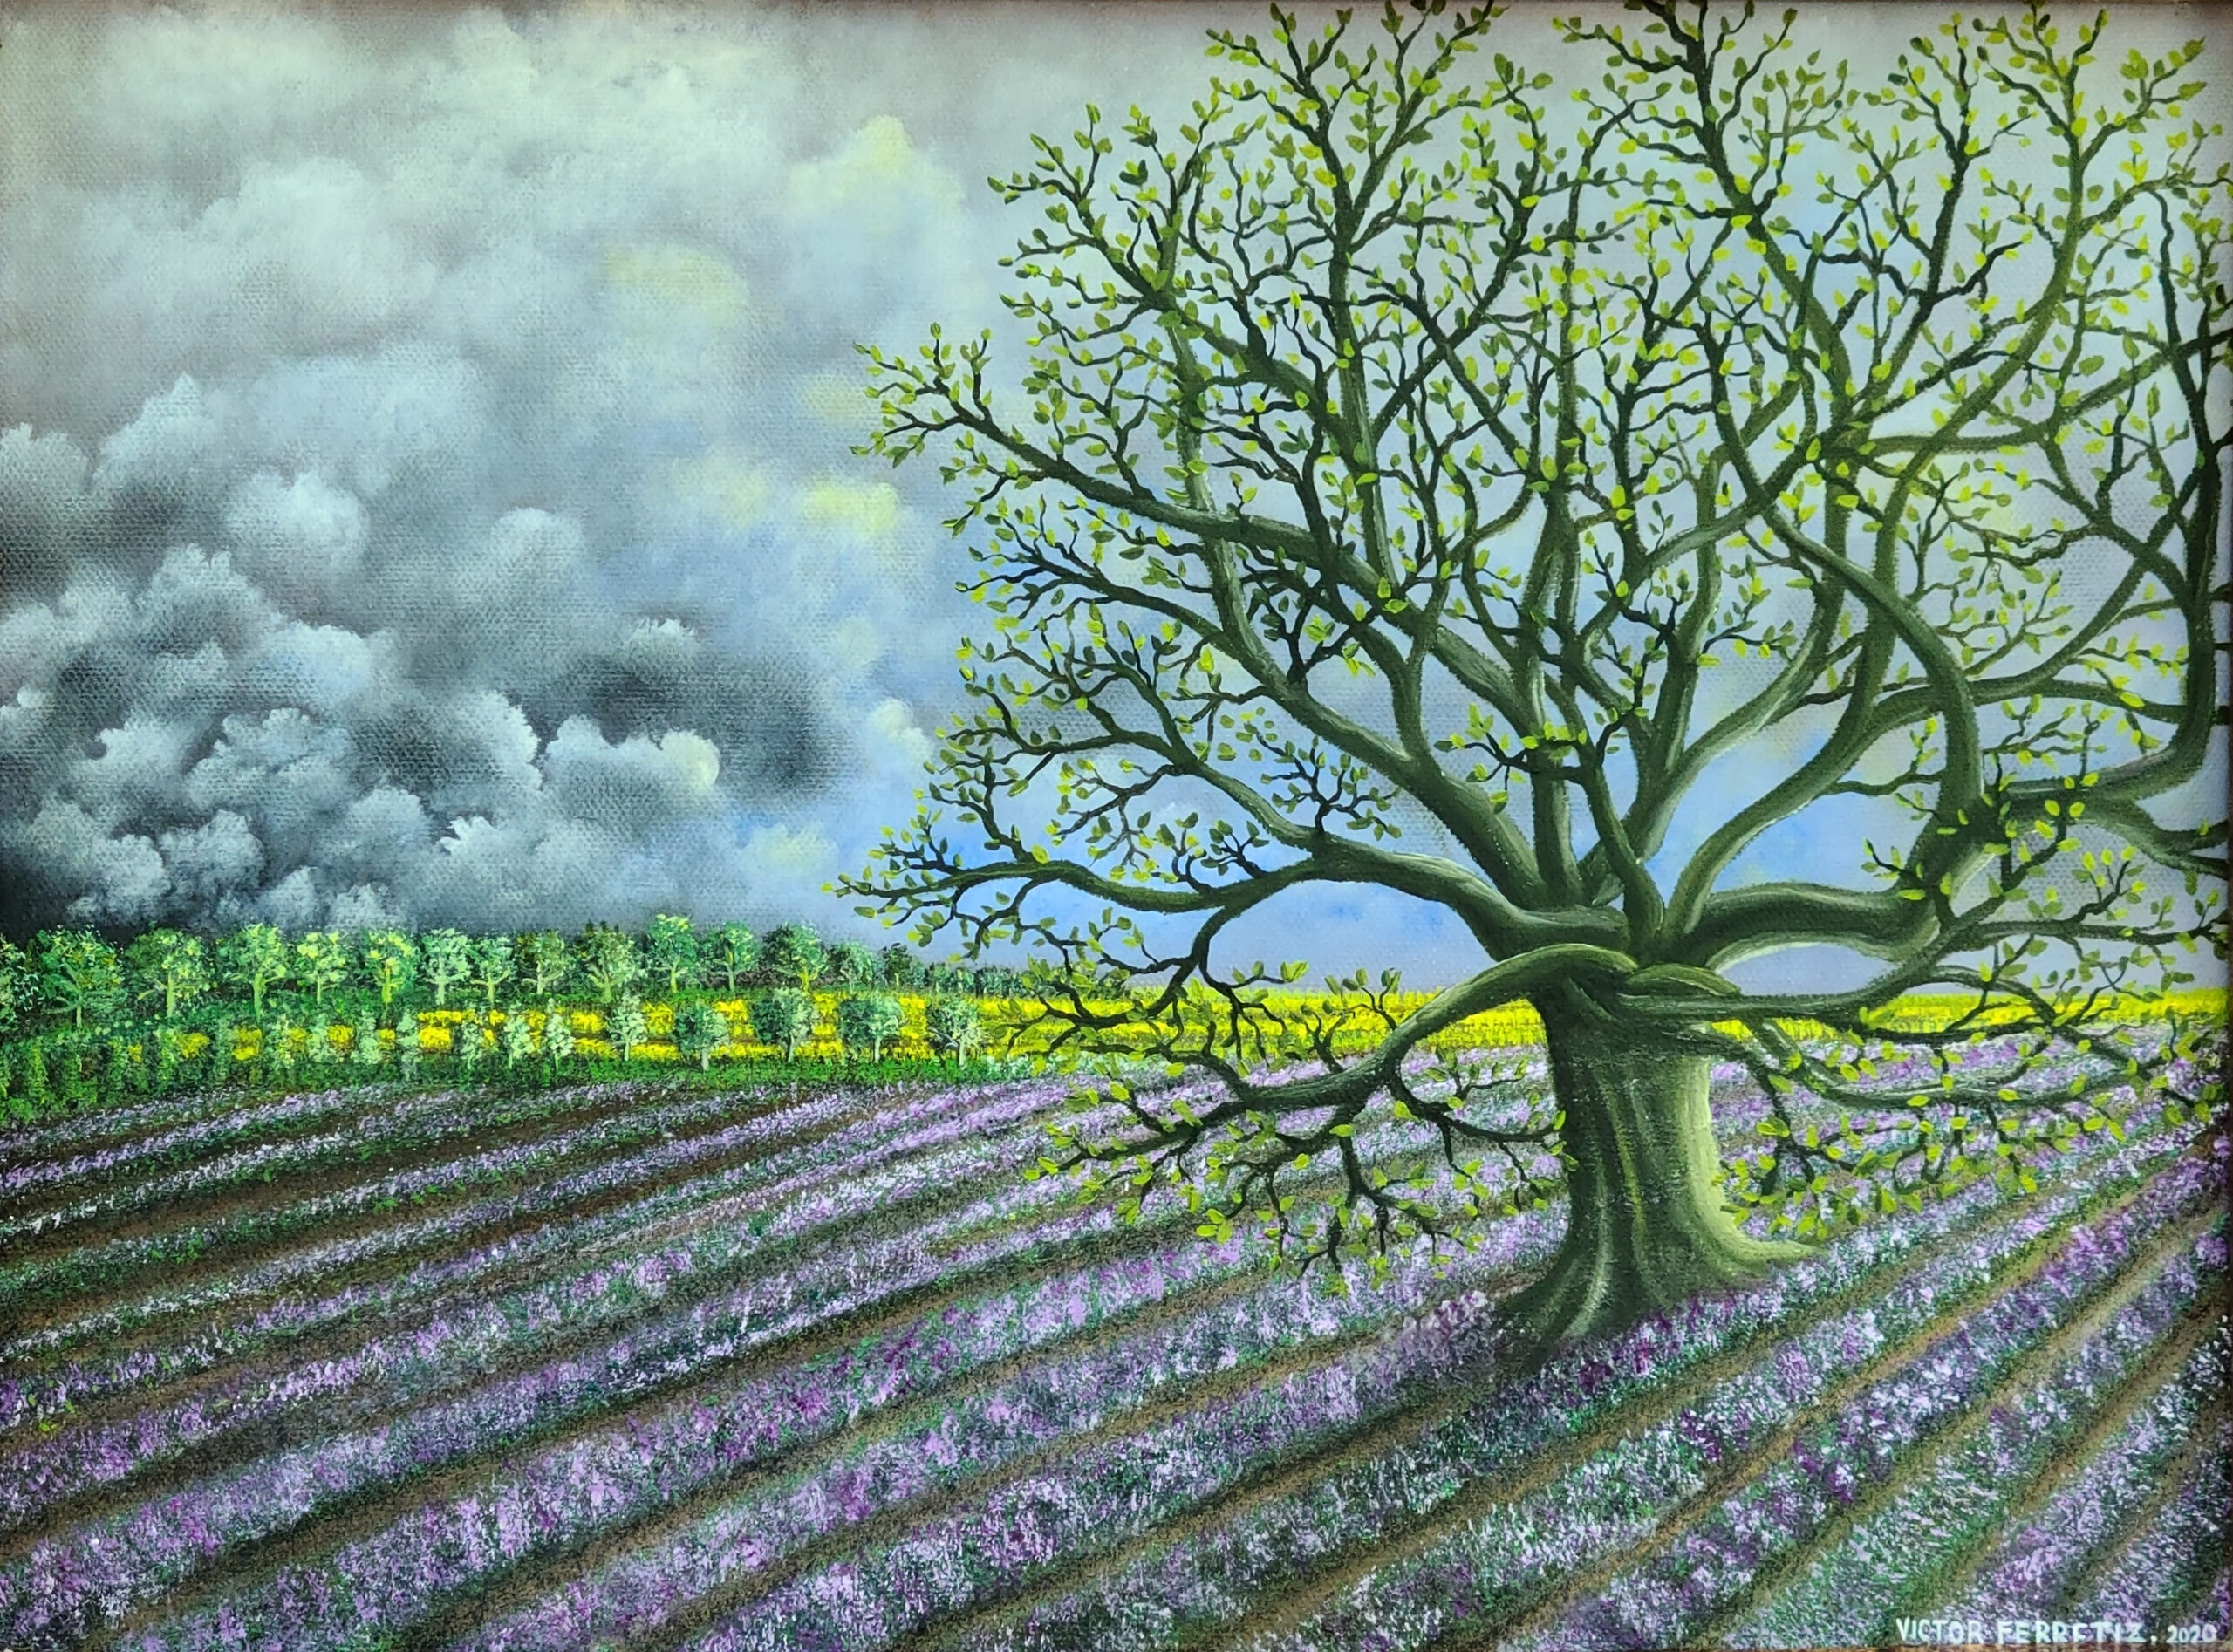 This original work of this beautiful old tree represents the wisdom and the extraordinary power to survive any obstacle in life. This tree represents the ability to seek means to achieve what you are looking for in life, just as the tree, without moving, manages to find water with its great roots to live. The lavender fields symbolize purity and the clouded sky makes us aware of threats beyond what we see.